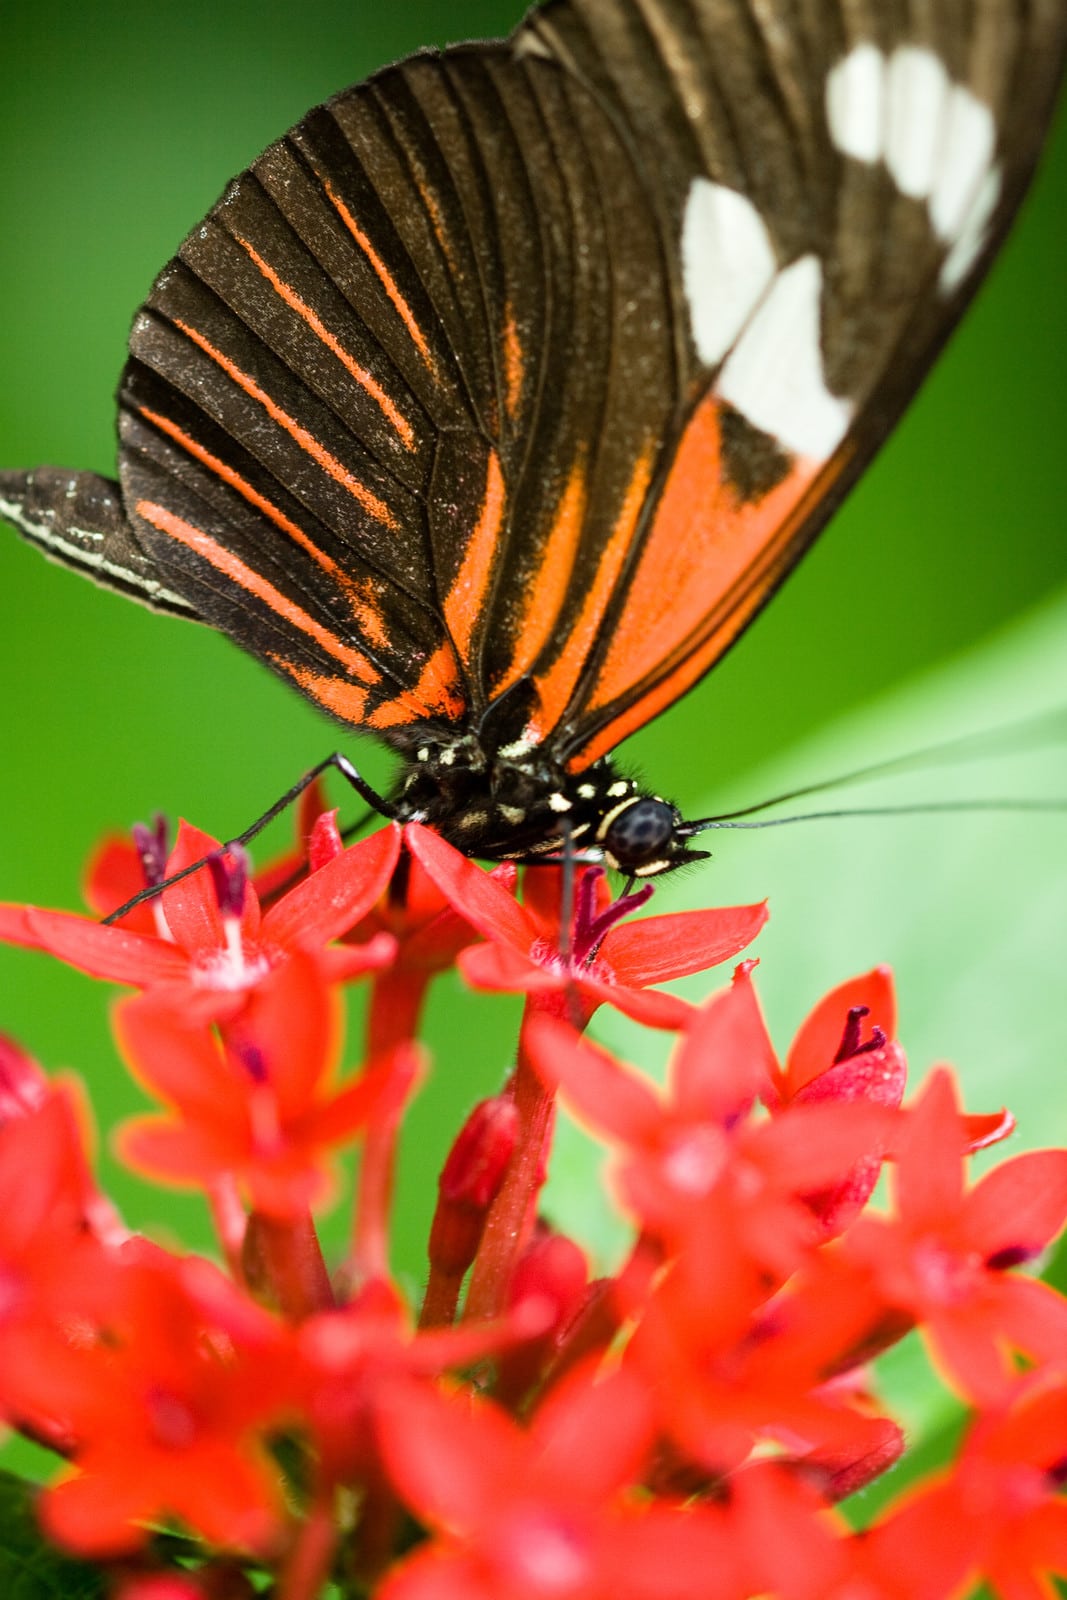 Mind-Blowing Butterfly Facts for Kids